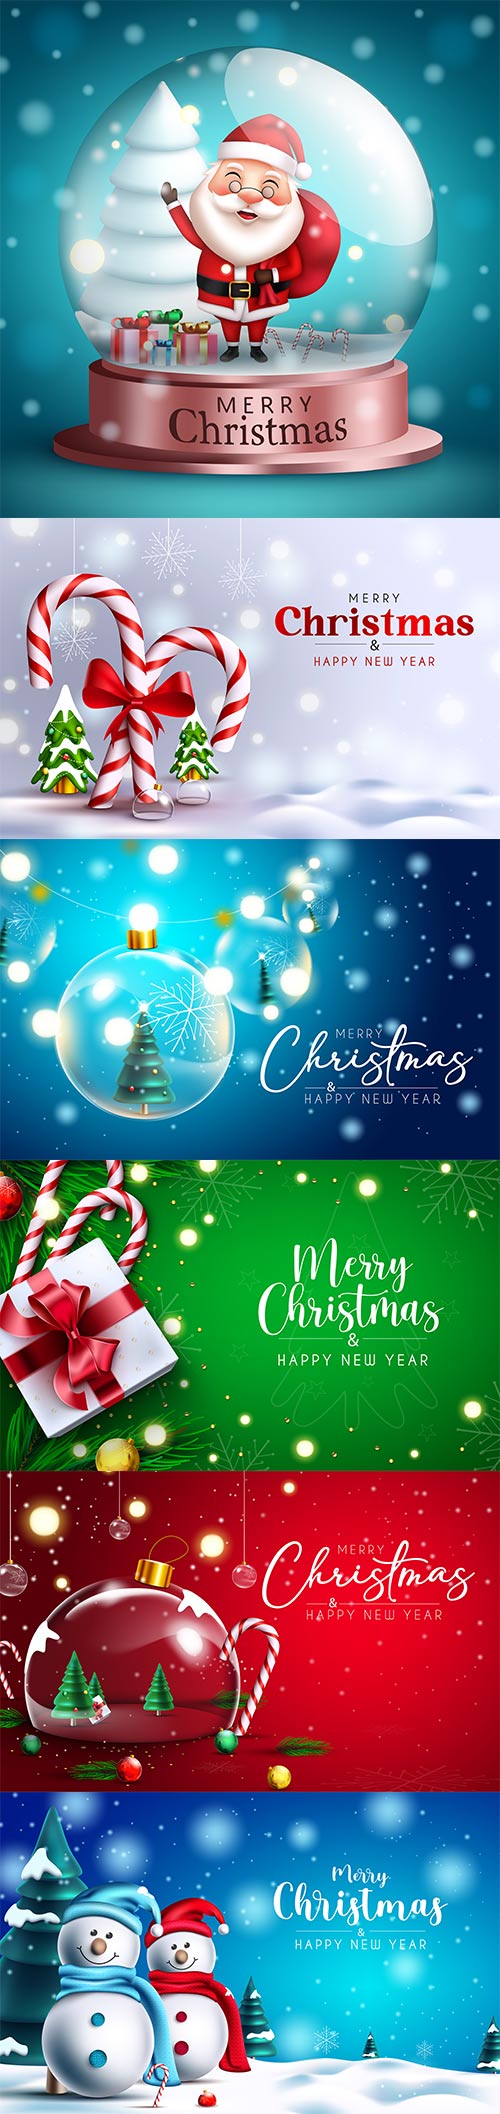 Christmas merry greeting vector set with santa claus